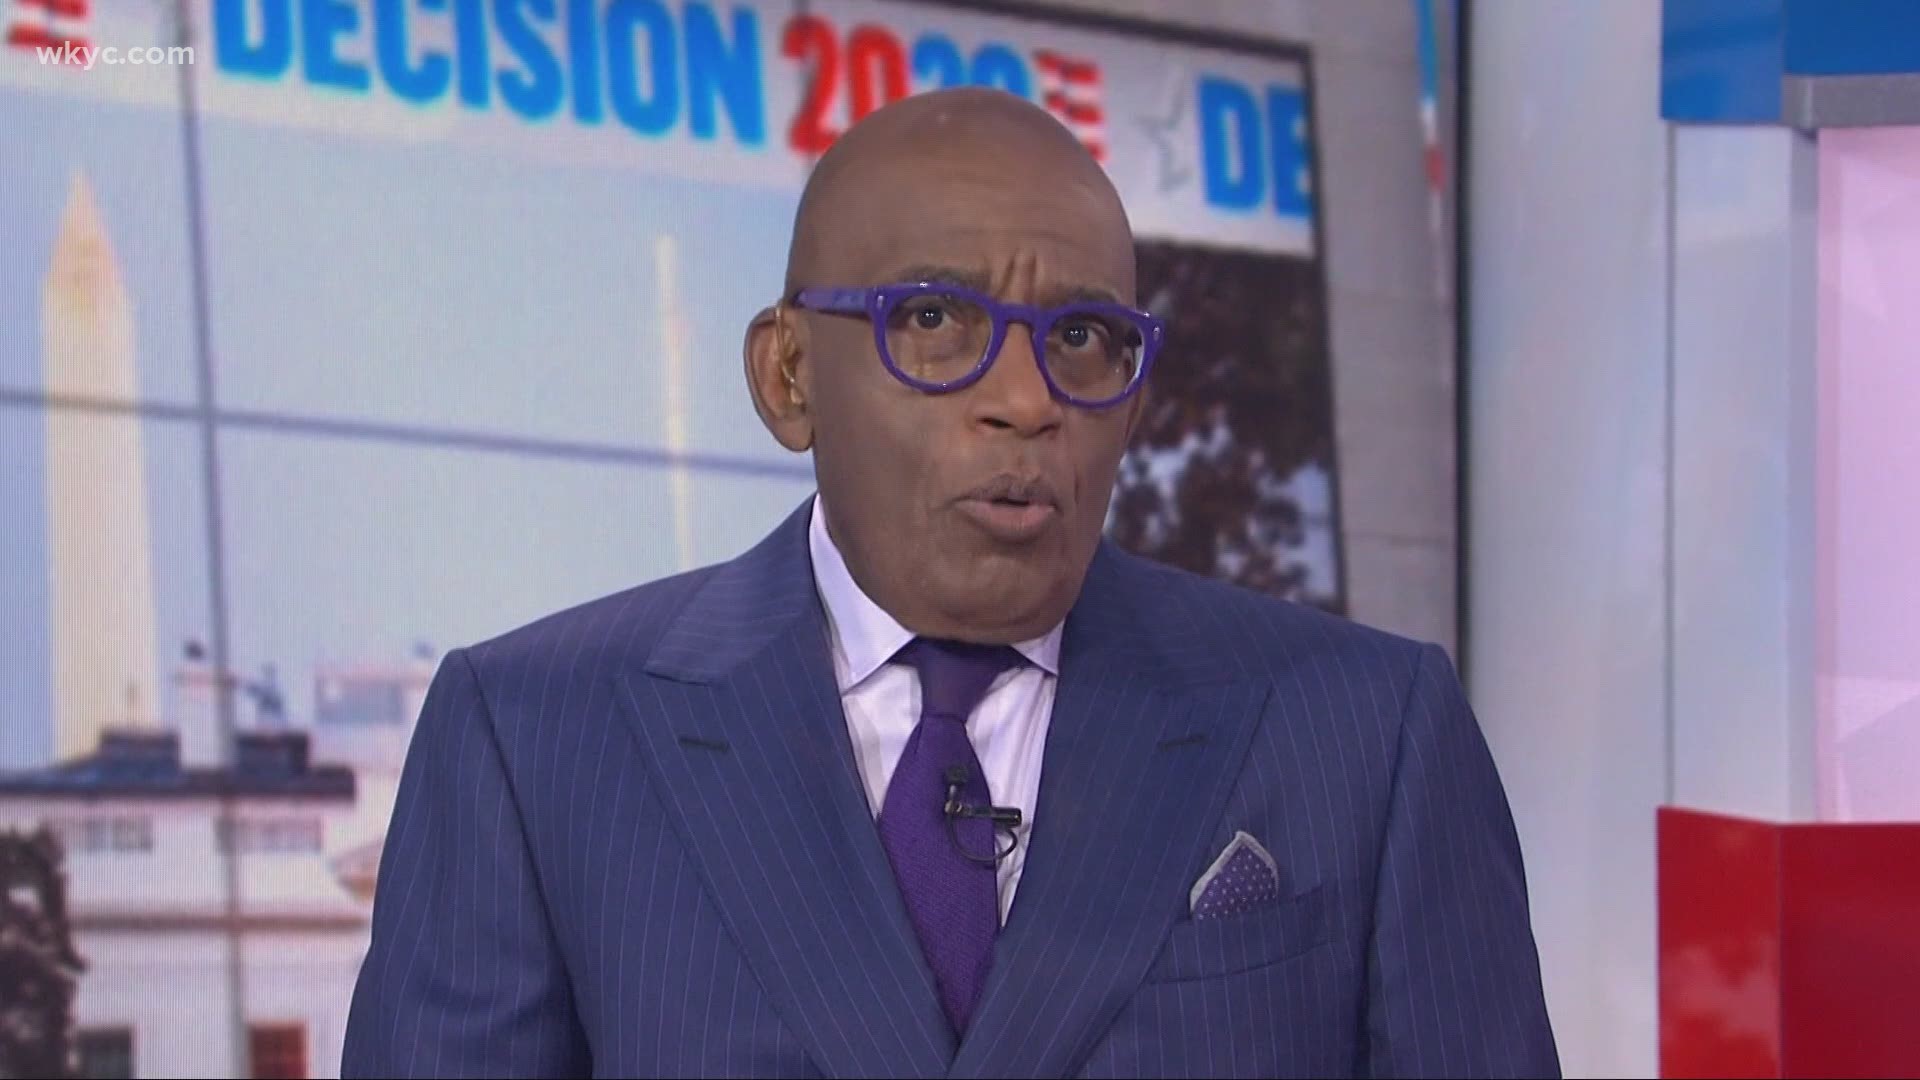 It's more common than you think, and prevention is key. Prostate cancer is being thrust into the spotlight, after NBC's Al Roker today revealed his own diagnosis.